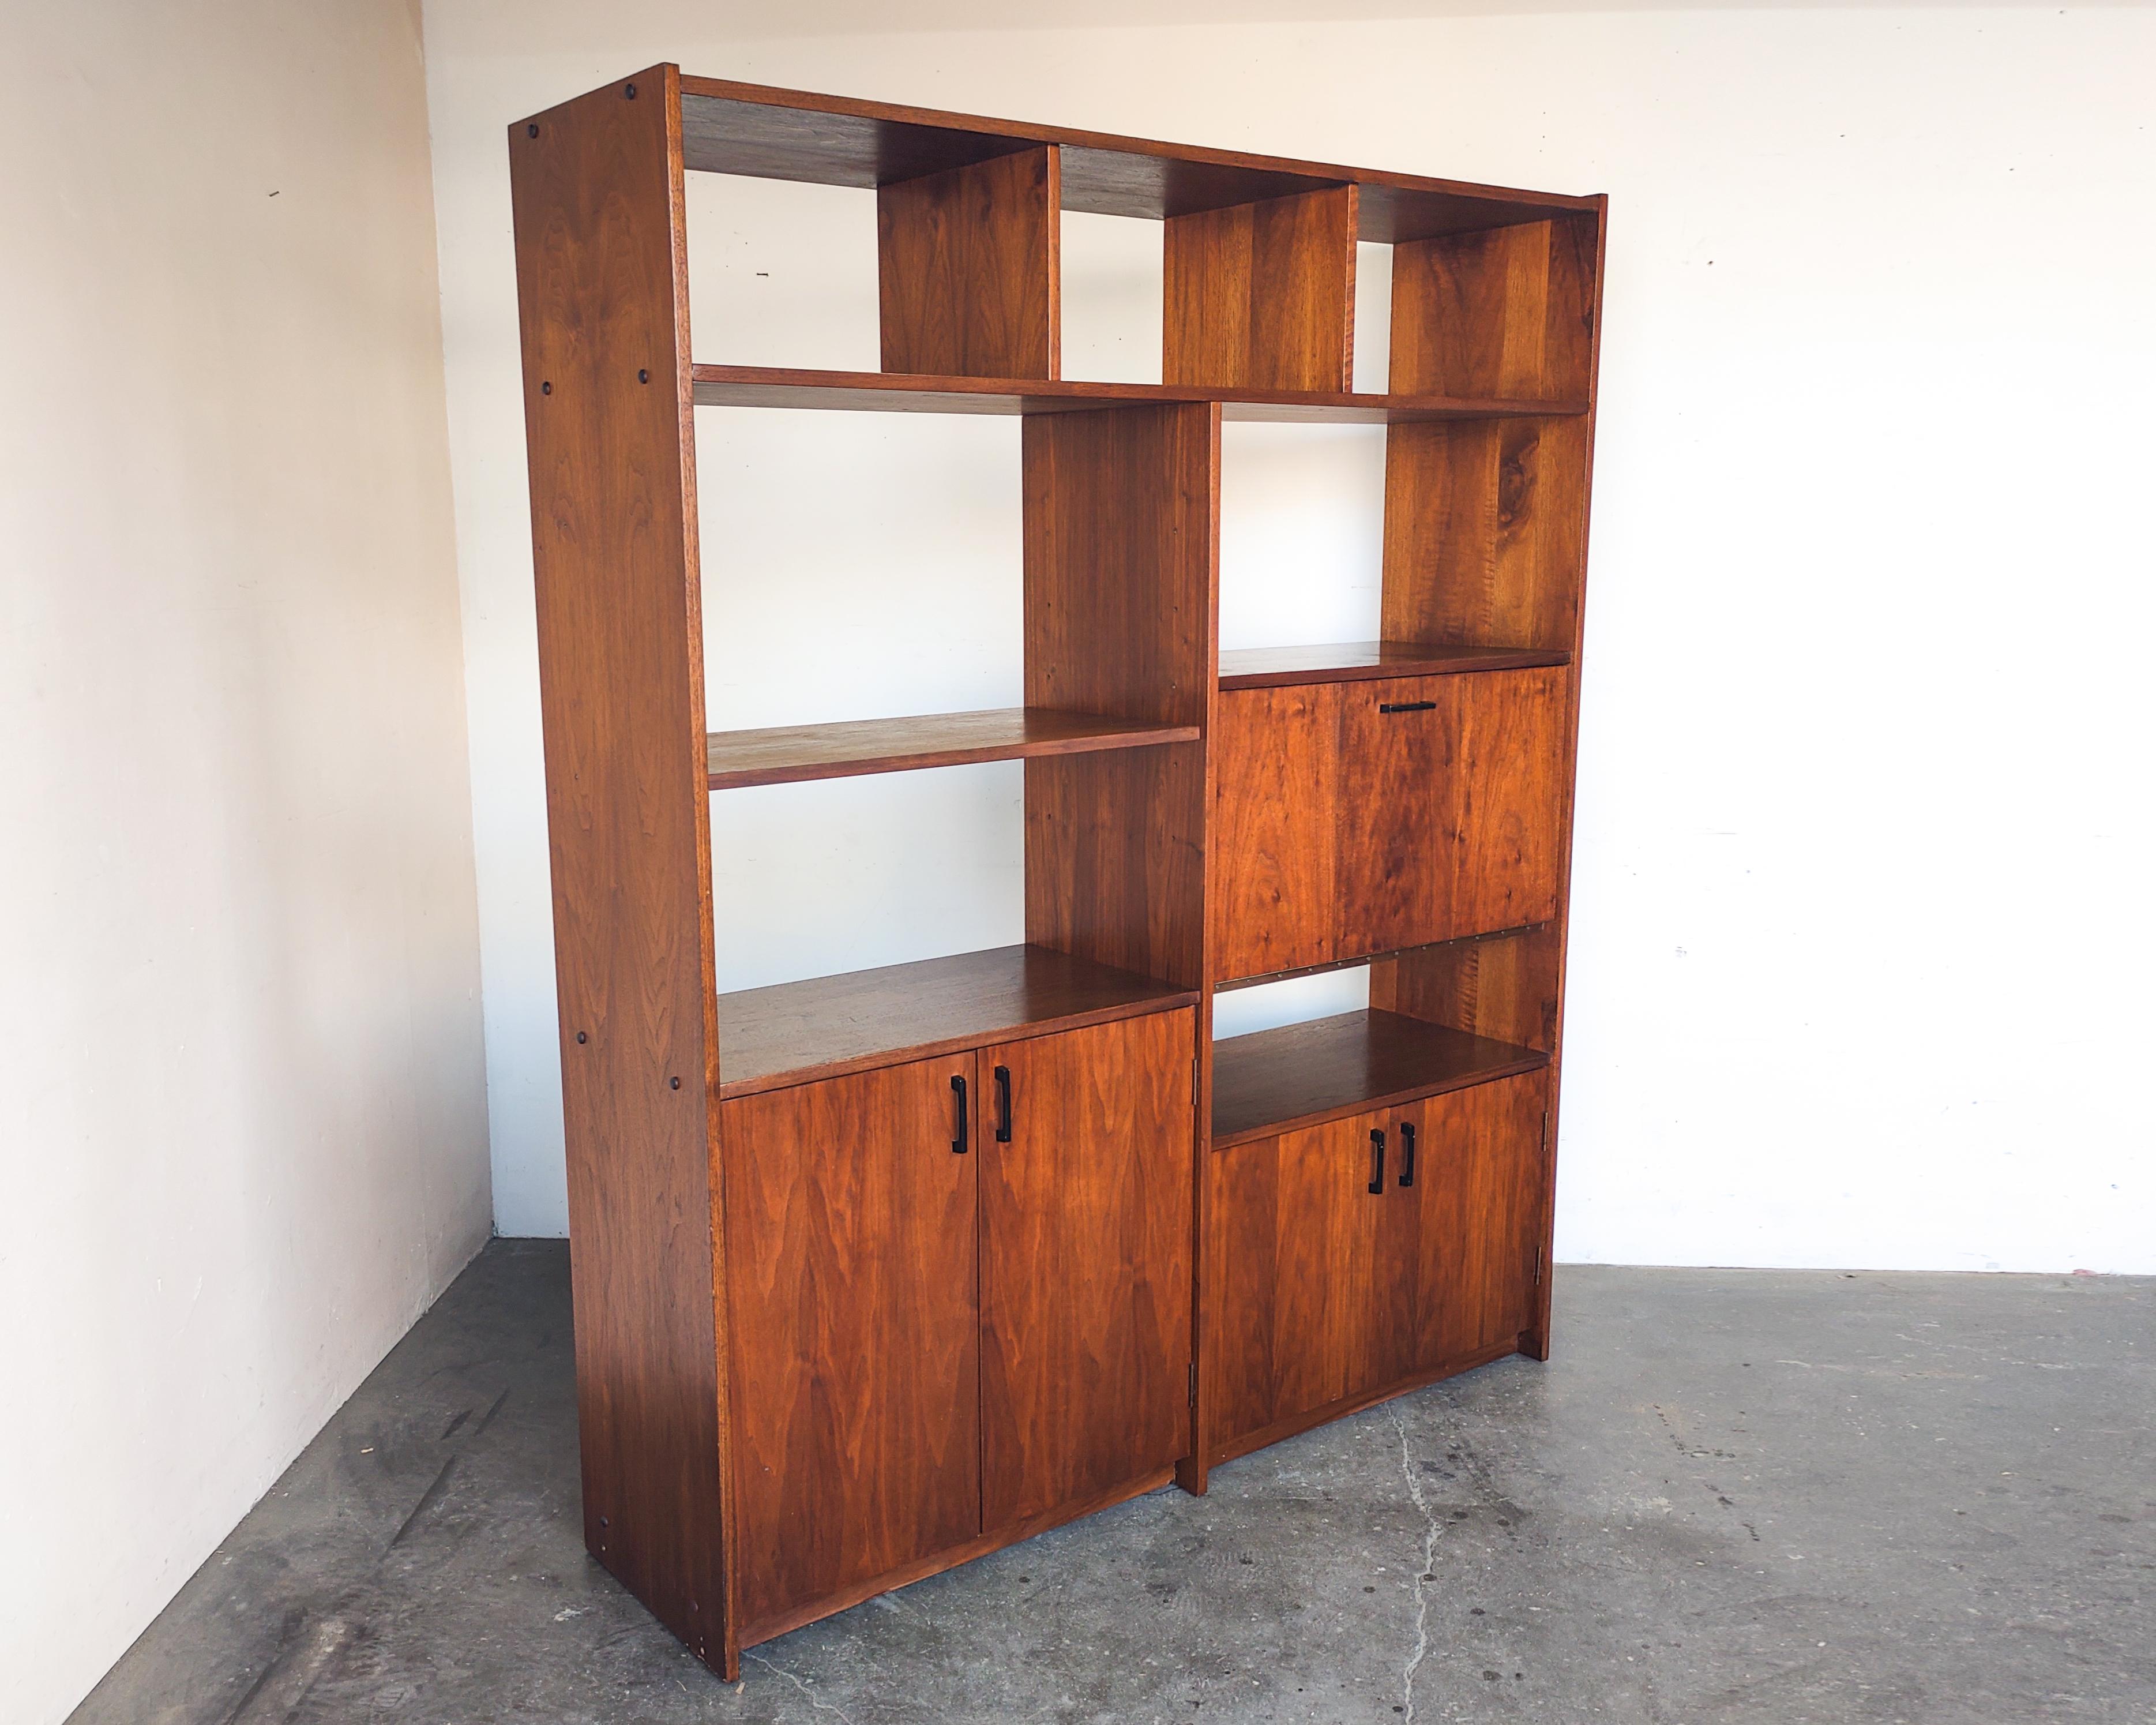 Walnut shelving wall unit with drop-down writing desk and black hardware. Cabinet storage on left has an adjustable shelf inside. Open shelf on left is also adjustable. Finished on the back, can drill holes for wires after purchase upon request.